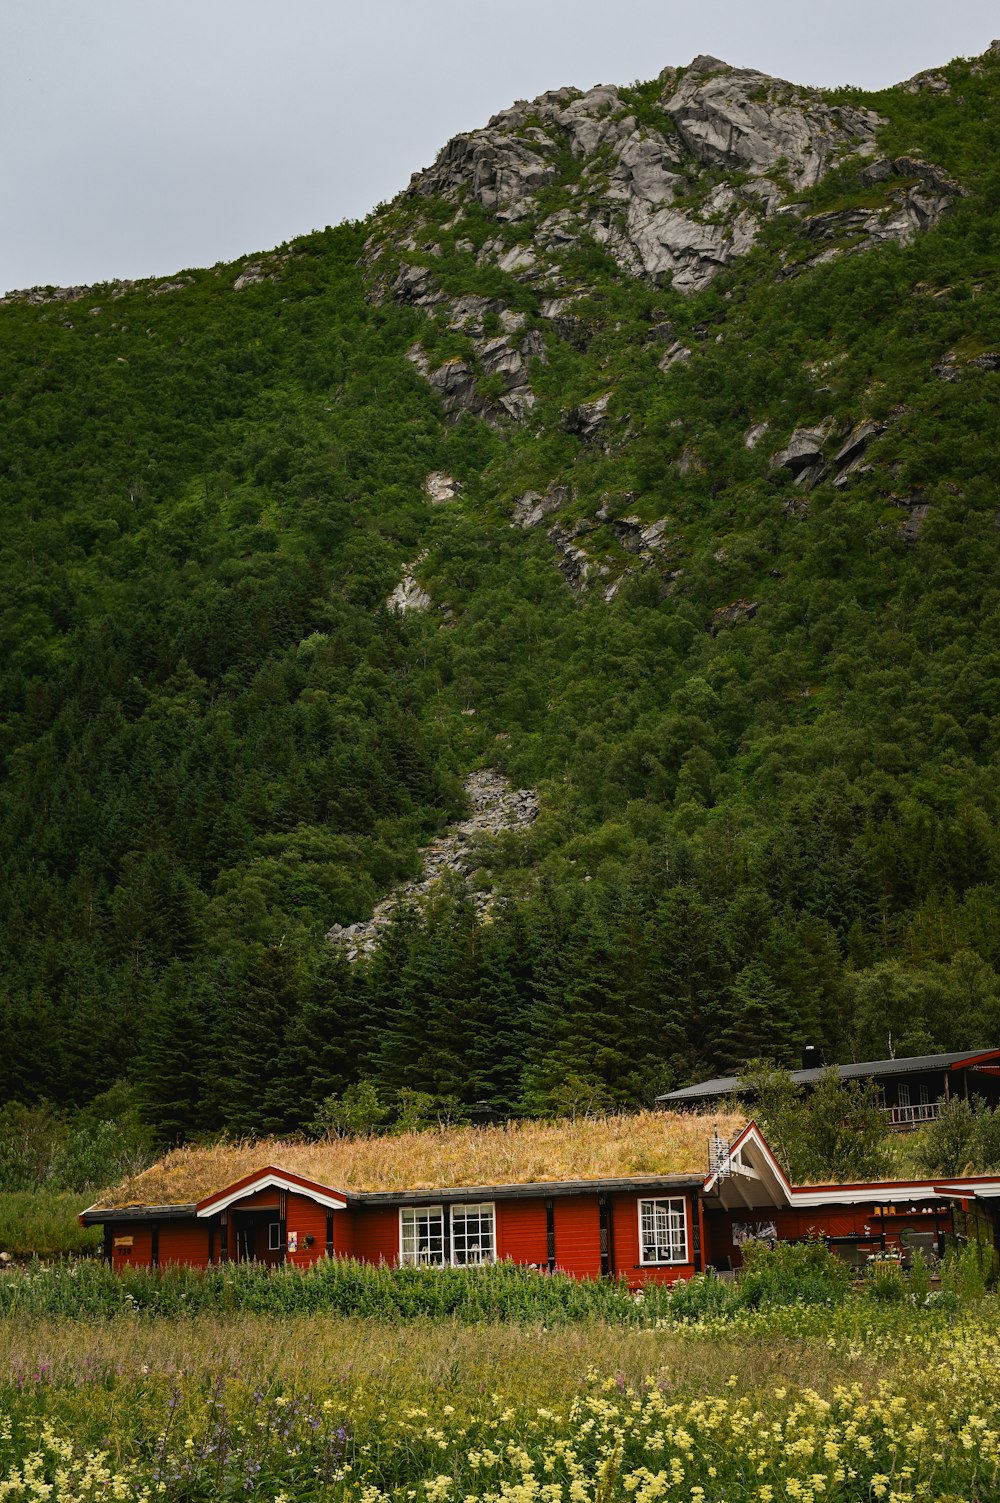 a red house with a grass roof in front of a mountain